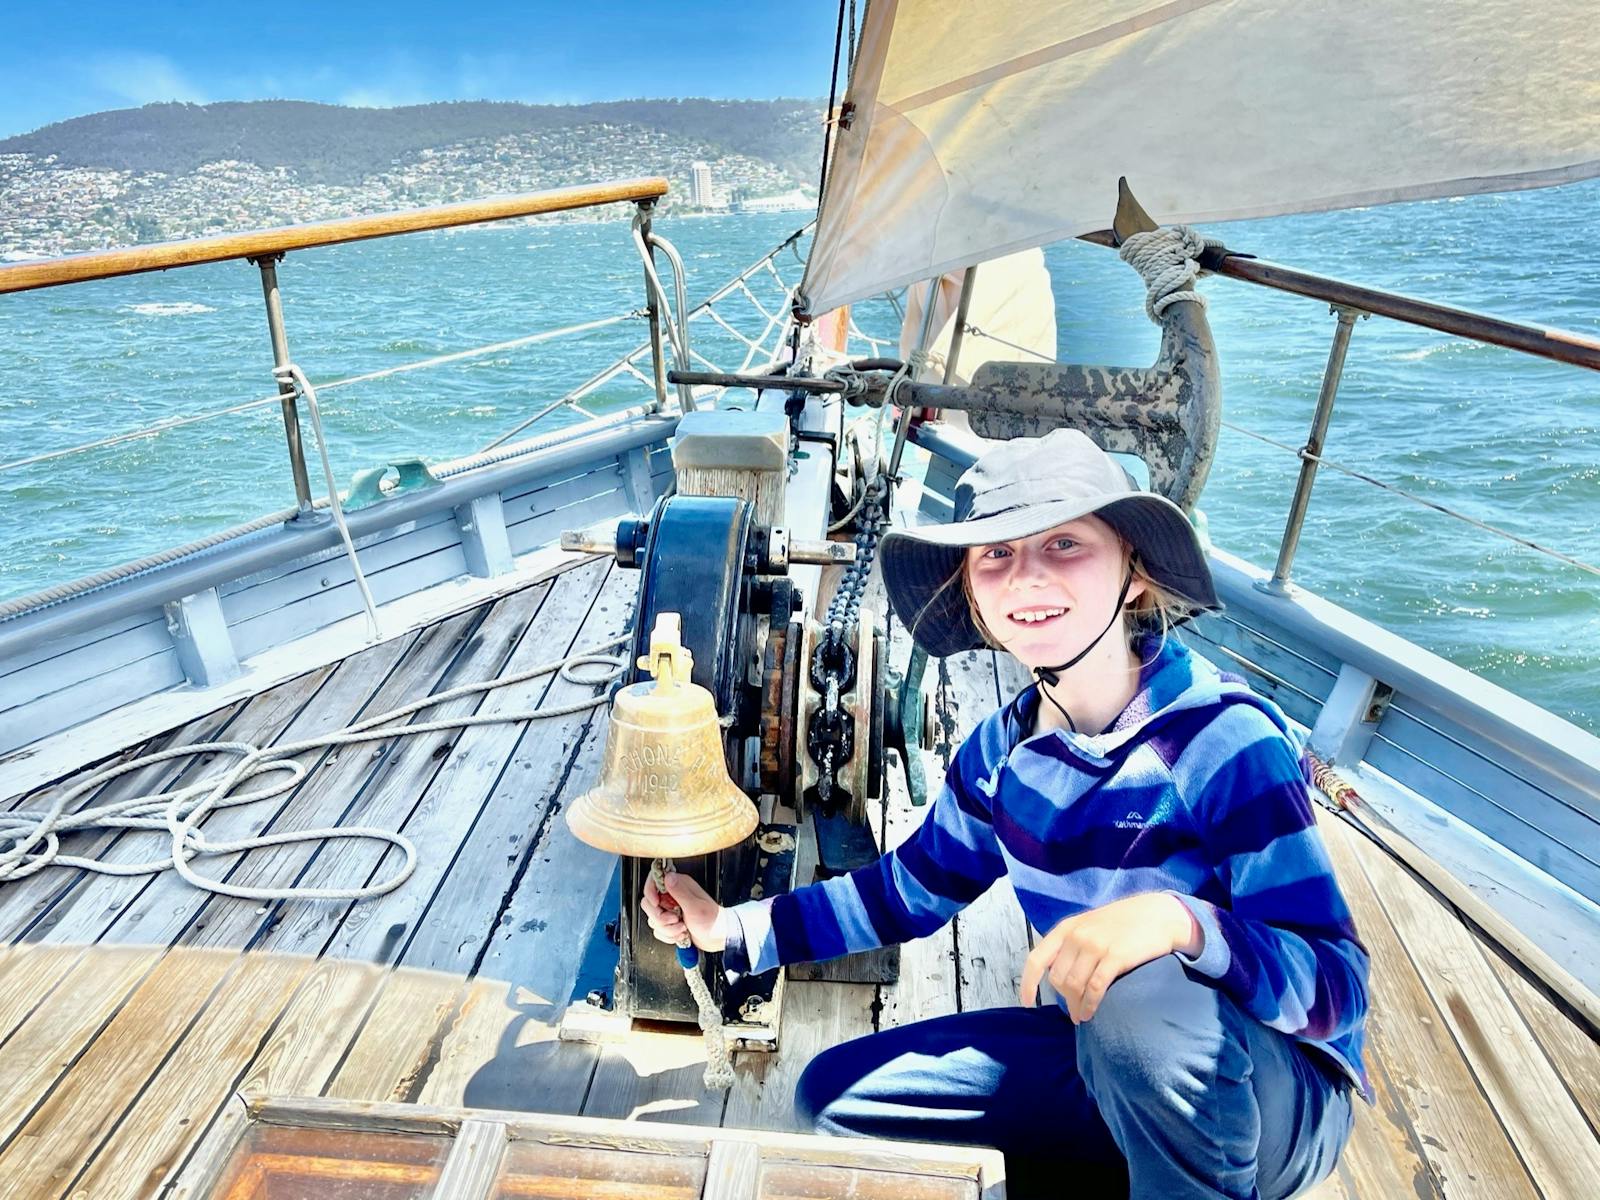 One of the guests onboard SV Rhona H ringing the bell